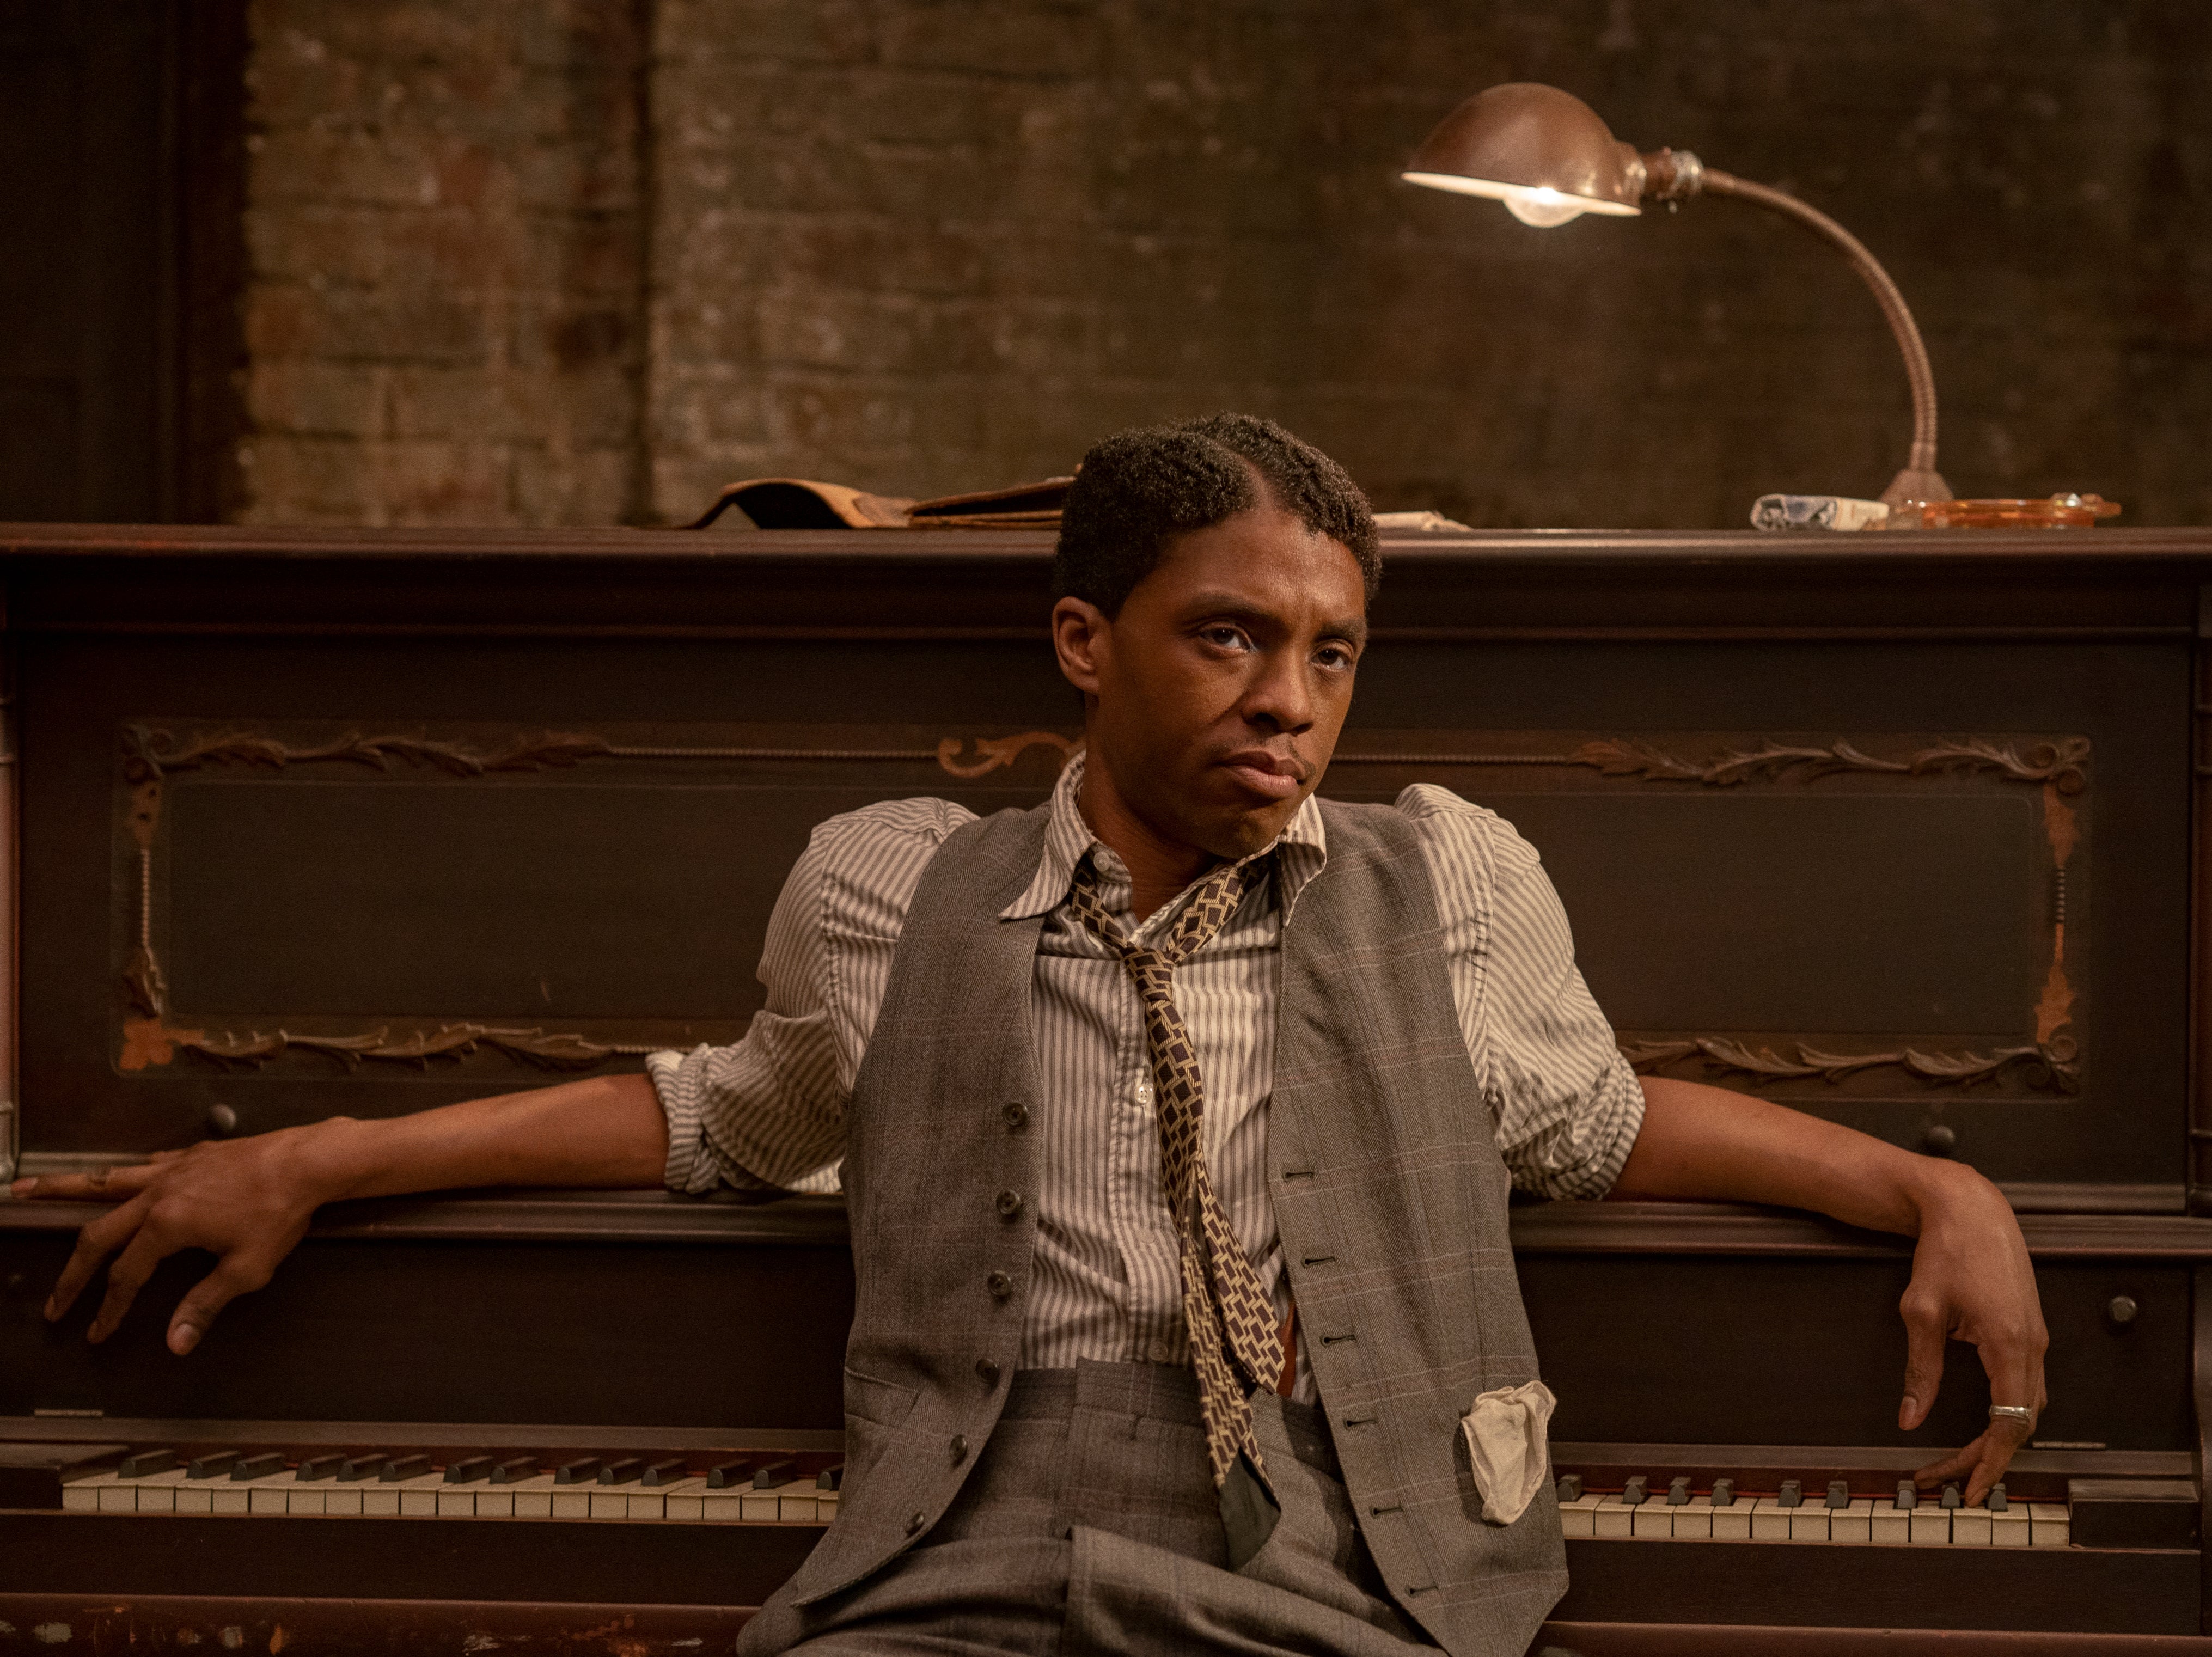 Lost keys: The late Chadwick Boseman was expected to win for Ma Rainey’s Black Bottom